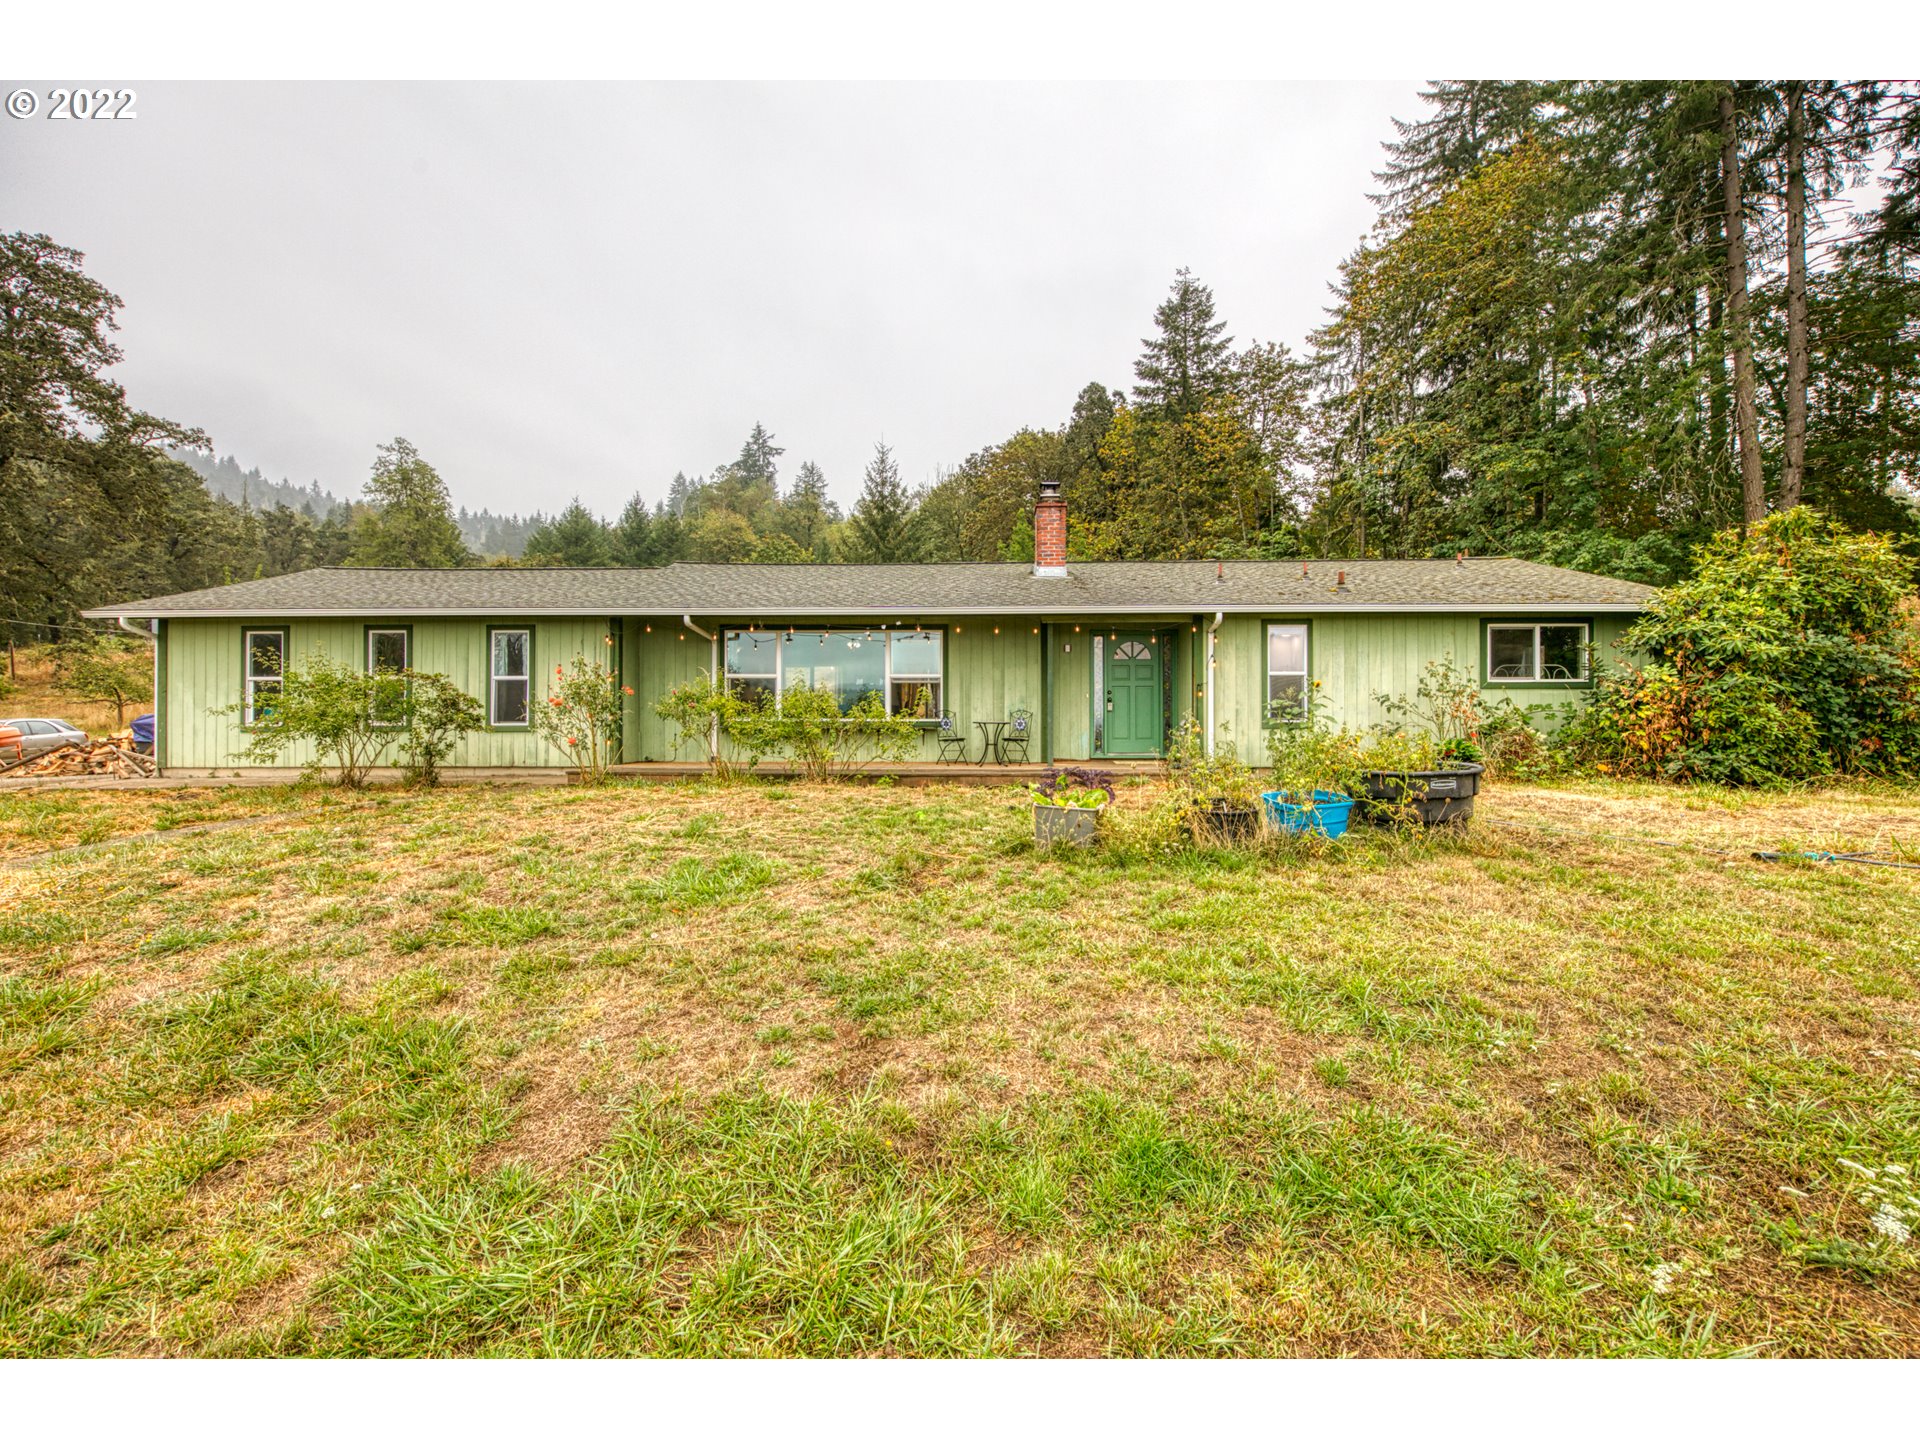 80433 SEARS RD, Cottage Grove, OR 